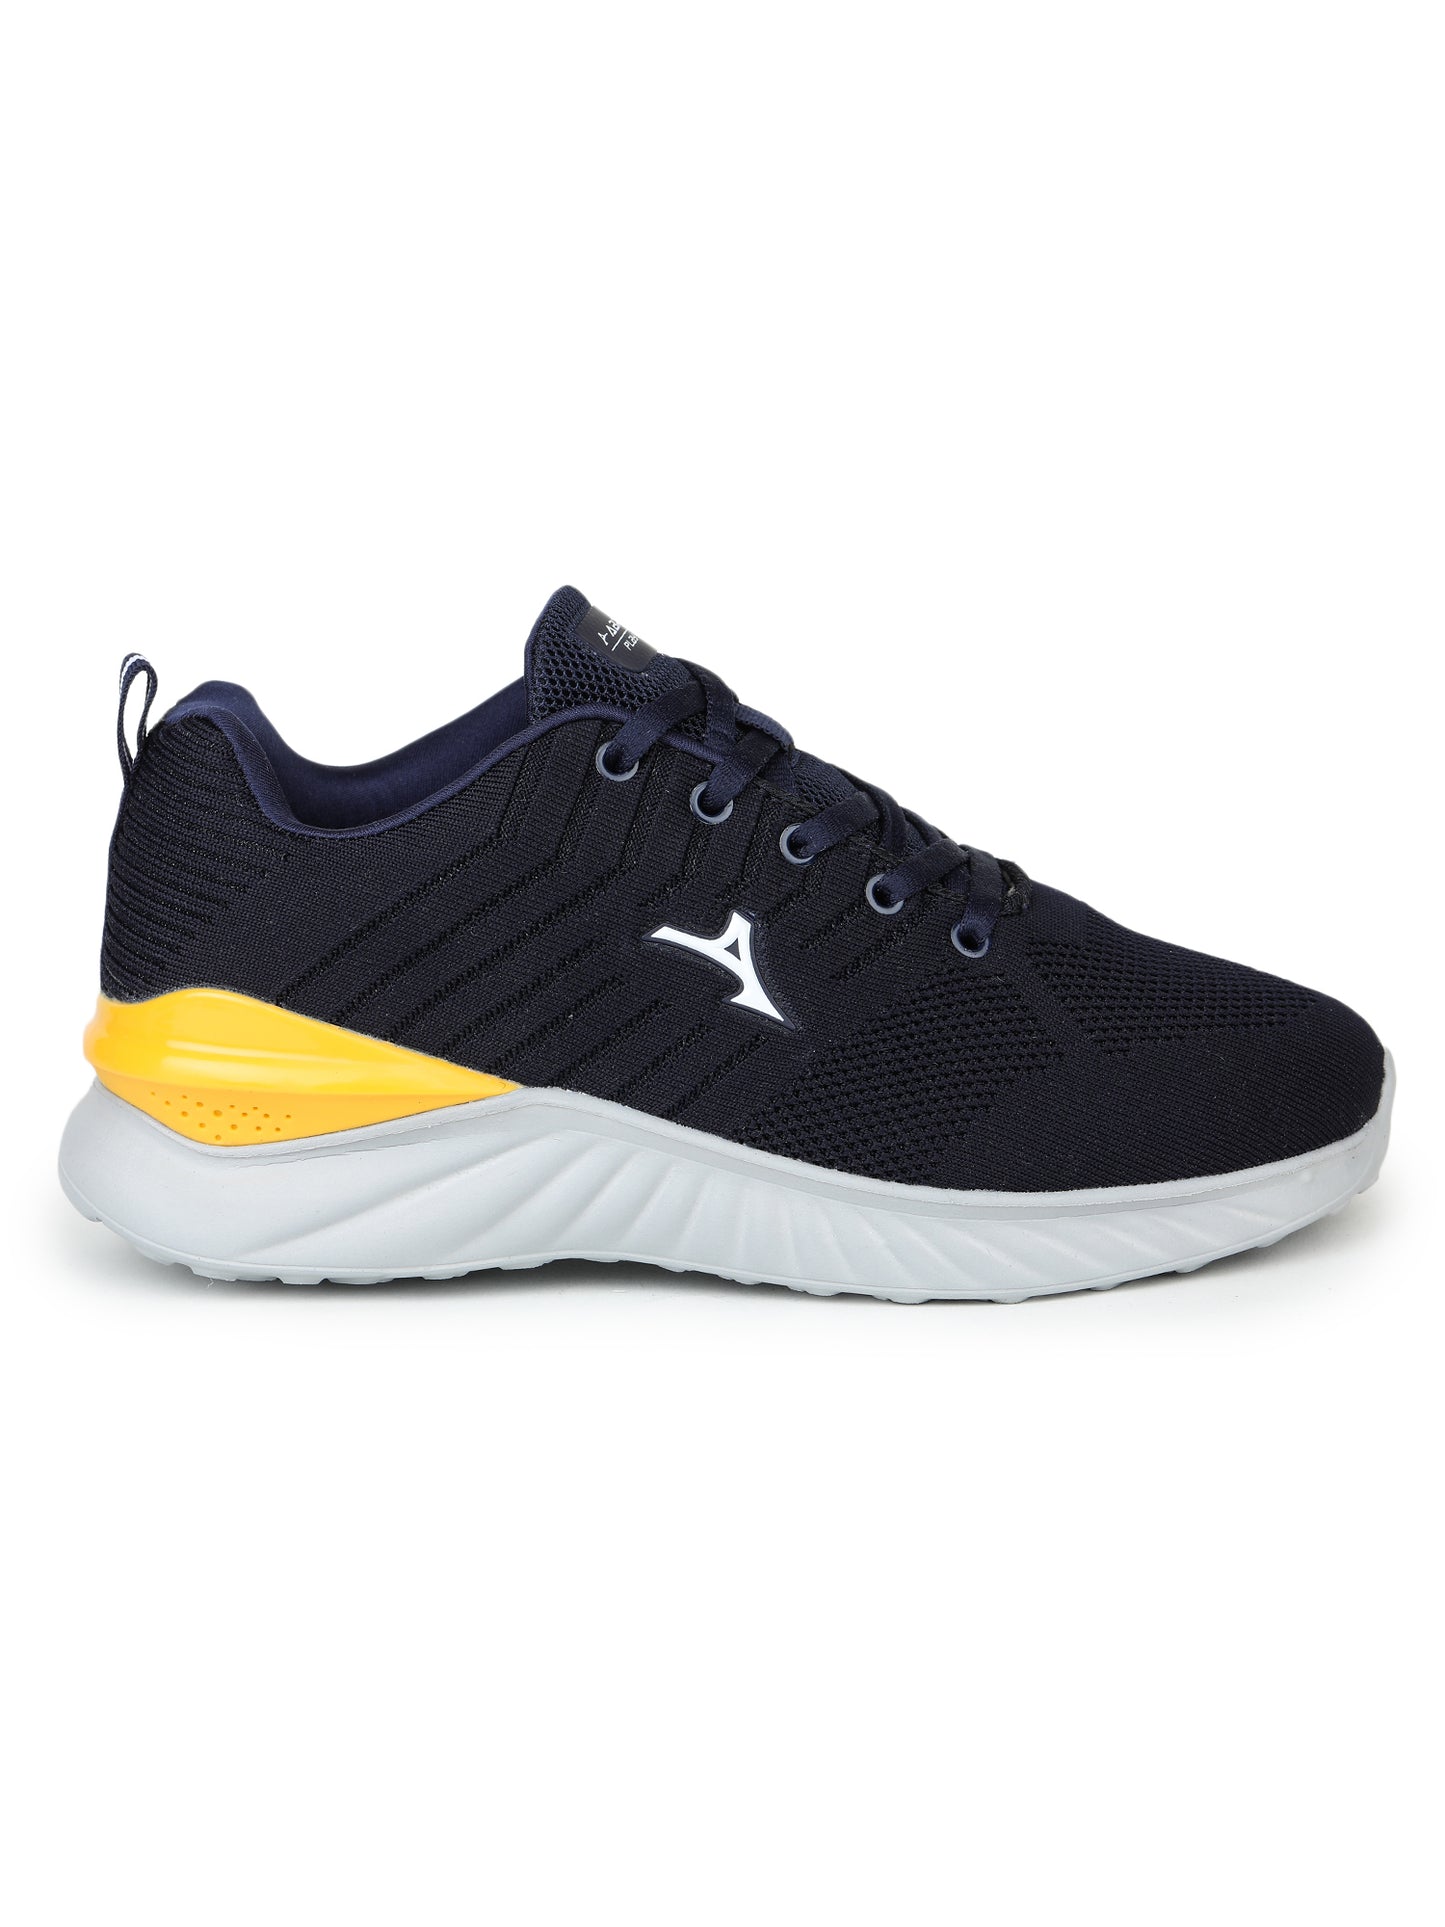 ABROS ROGER SPORT-SHOES For MEN'S